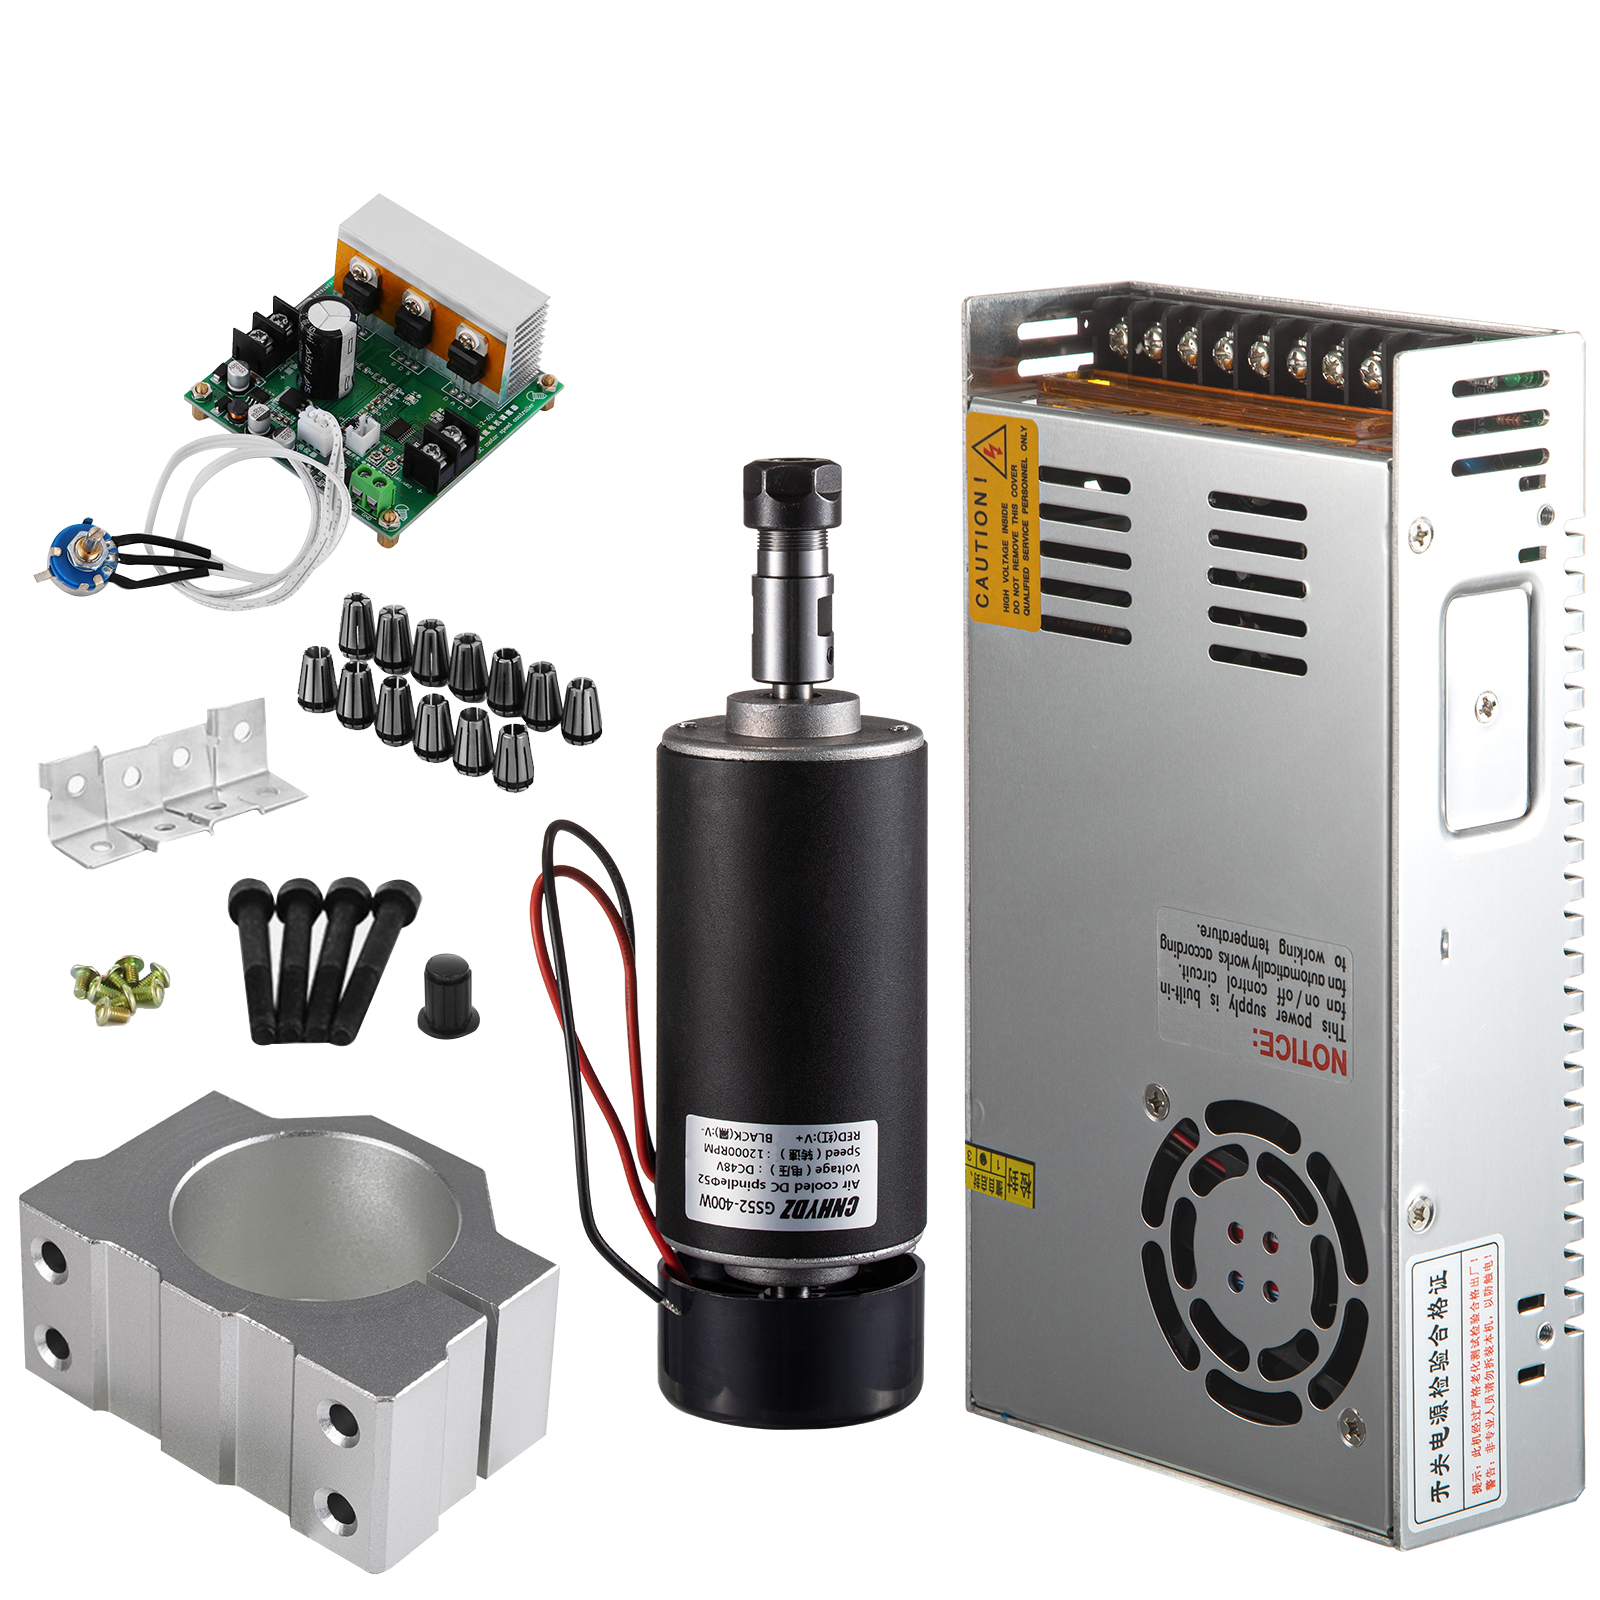 Cnc Spindle Motor 400w Er11 & Mach3 Pwm Speed Controller + Mount Engraving Kit от Vevor Many GEOs